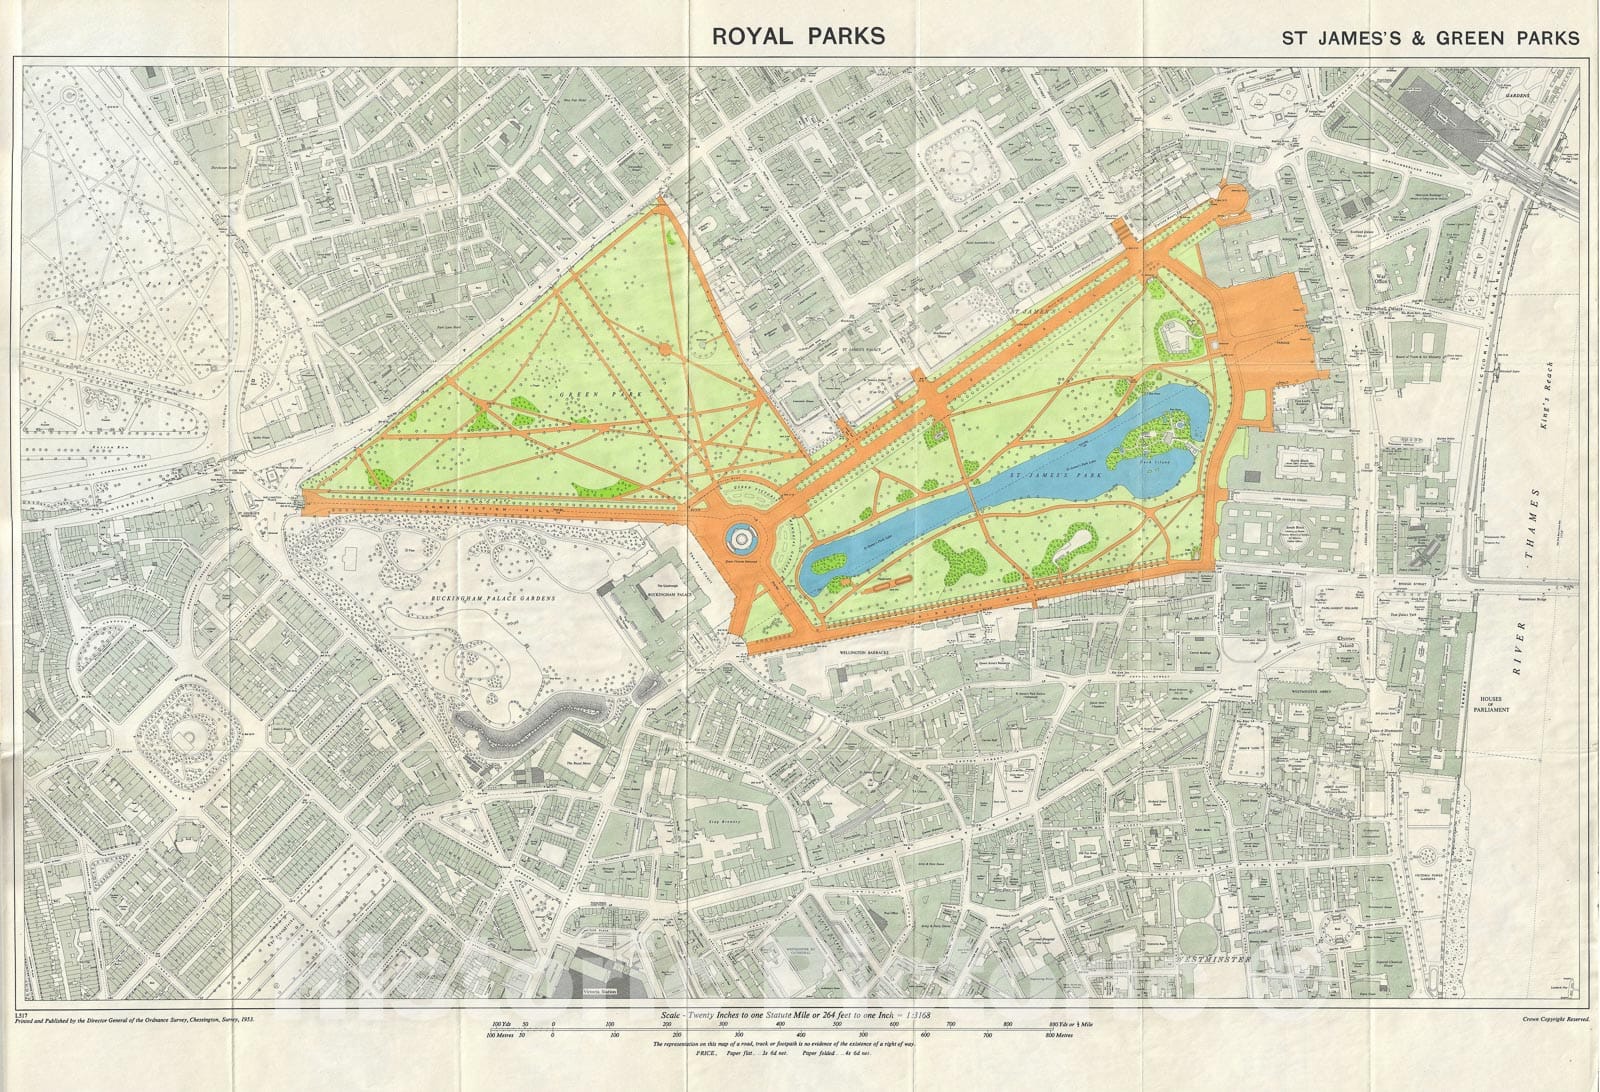 Historic Map : The St. James's and Green Parks "Royal Parks", London, England, Ordnance Survey, 1953, Vintage Wall Art